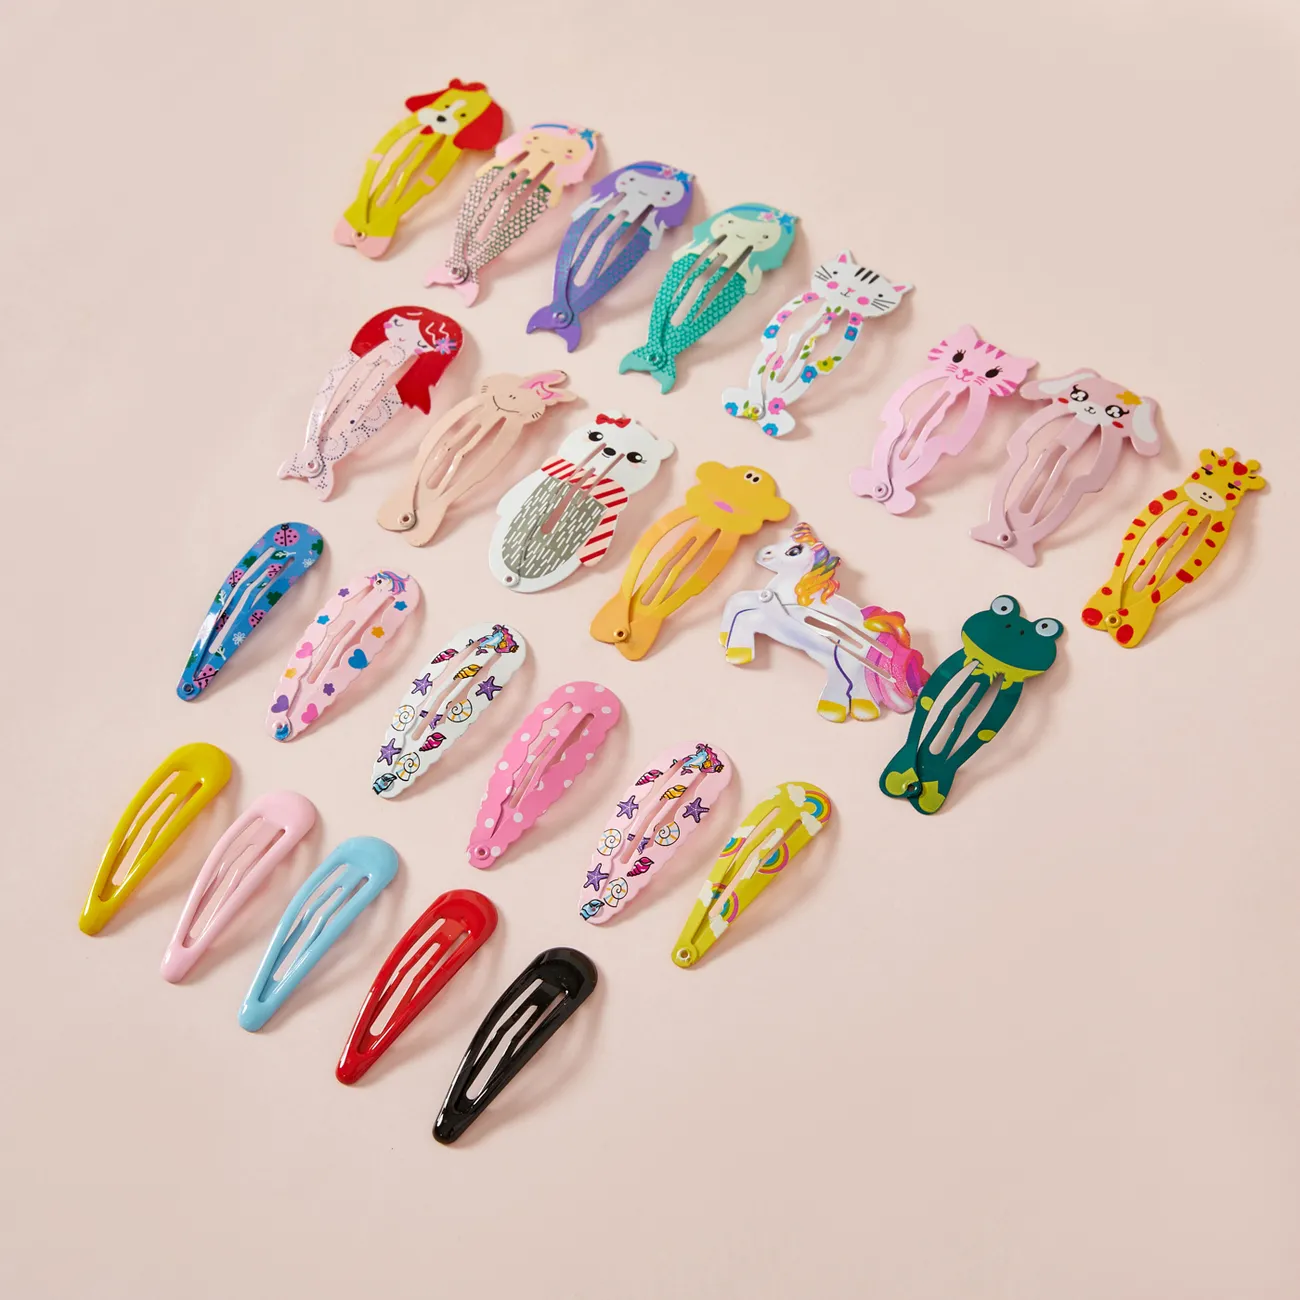 25-pcs Cute Candy Color Cartoon Design Hair Clips for Girls Color-A big image 1